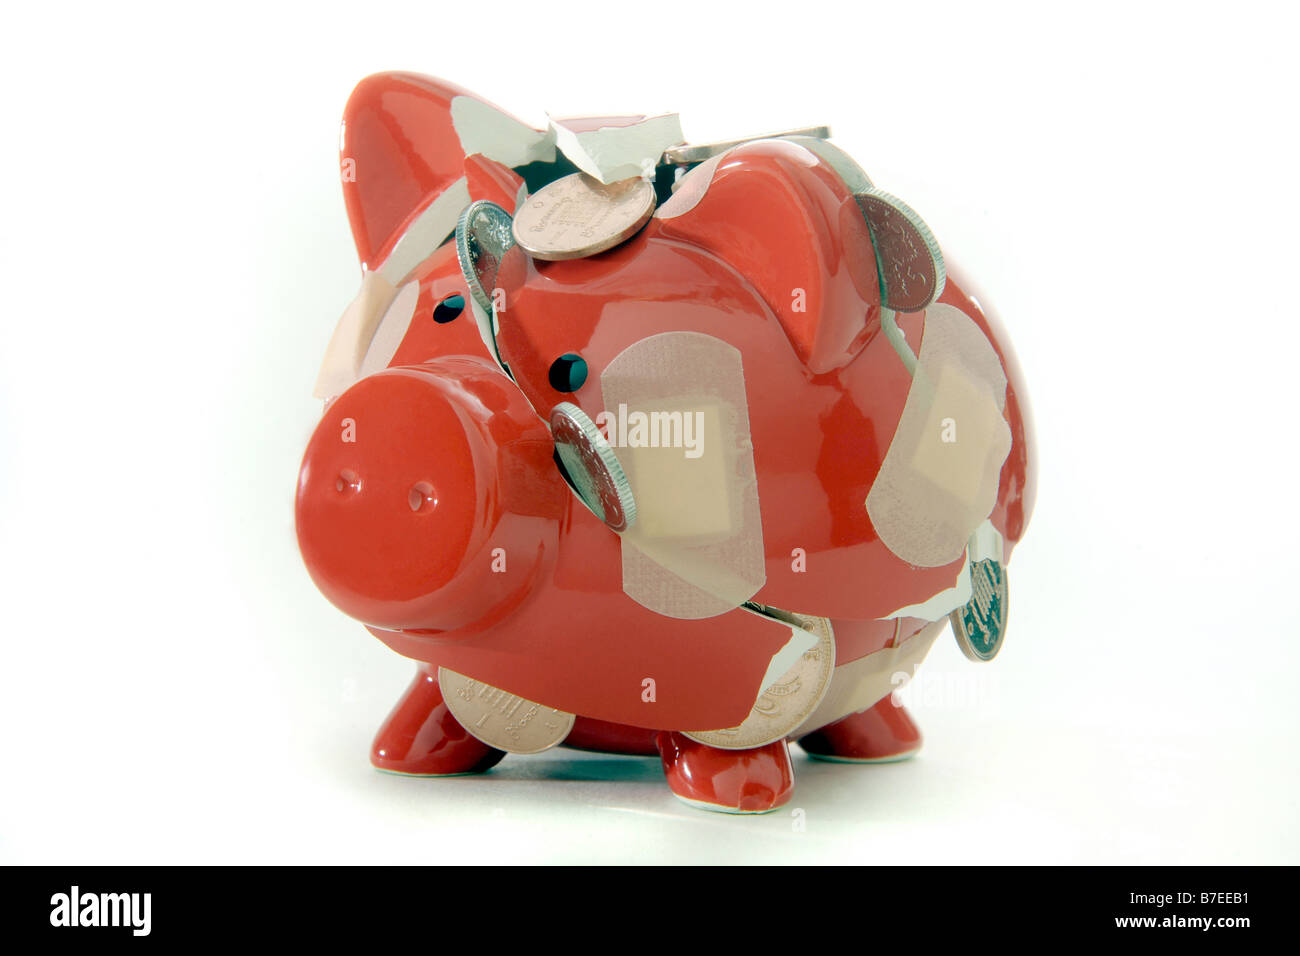 A BROKEN RED PIGGYBANK LOSING ITS CONTENTS OF BRITISH COINS... HELD TOGETHER WITH PLASTERS. Stock Photo